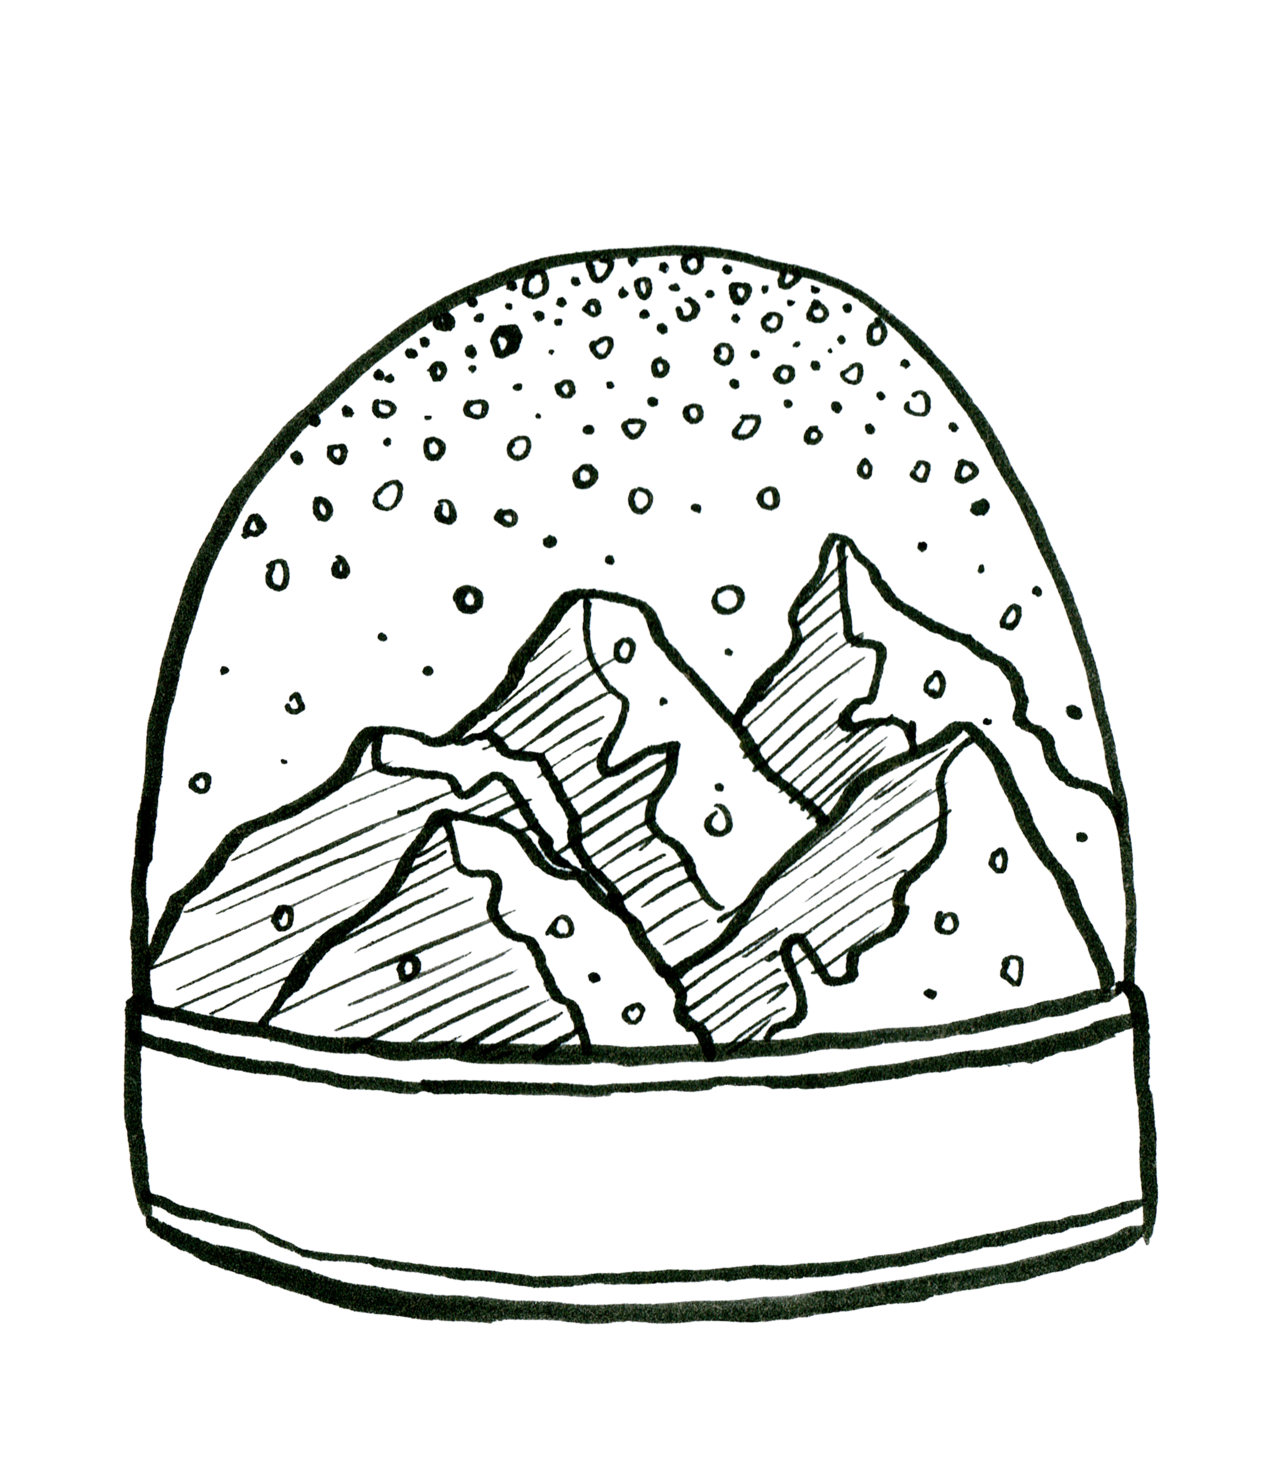 Download Snow Globe And Mountains Sketch Png Image With No Background Pngkey Com